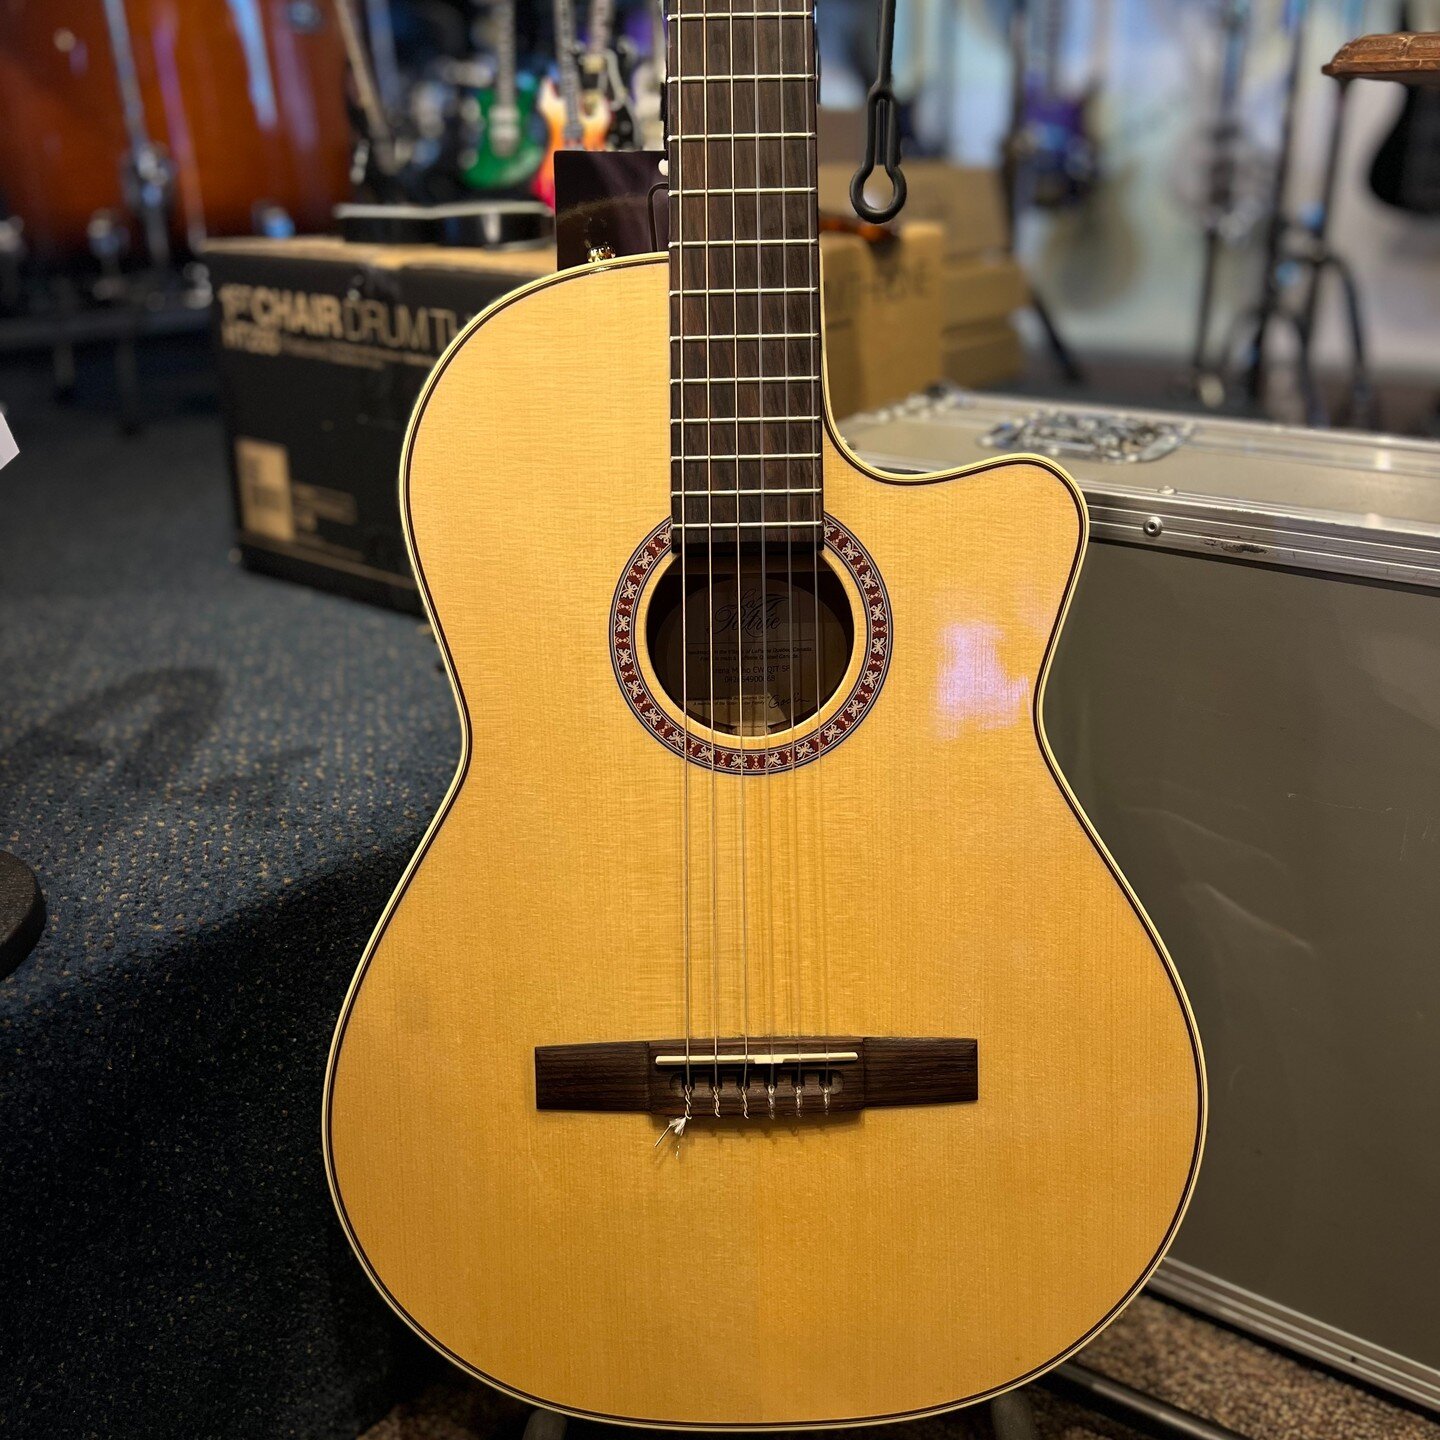 Just in, used. Great condition. Made in Canada by Godin, this la Patrie Arena, with pickup, has a much thinner body than a normal classical guitar. It has amazing loud and beautiful tone, with lots of low end and a beautiful even sound. Solid top, of